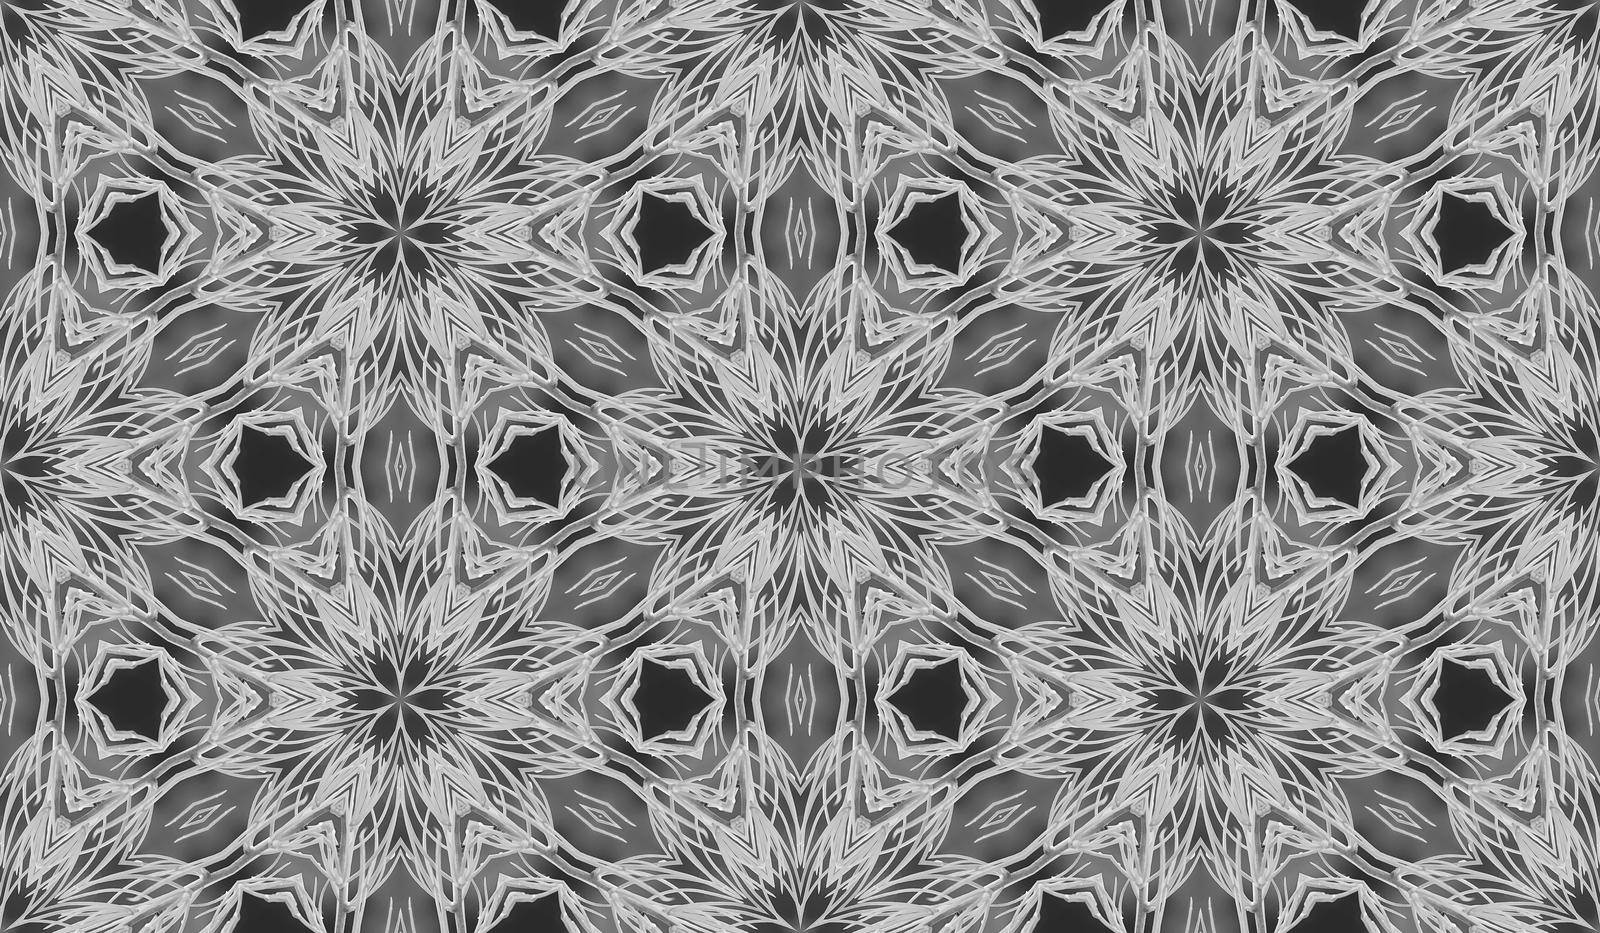 Abstract seamless lace texture from photo in grey-black color.